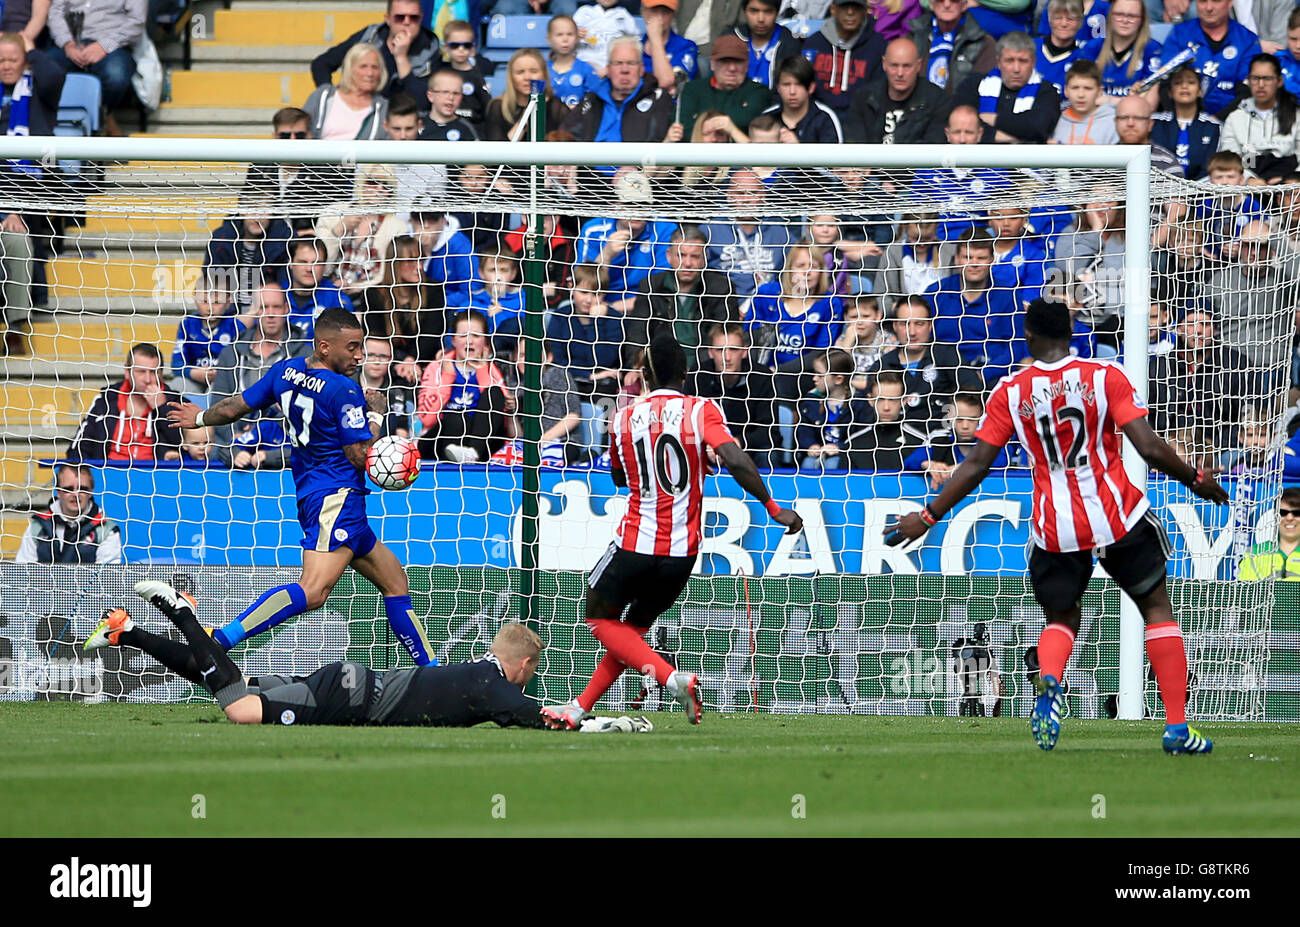 Southampton's Sadio Mane (centre) has a shot blocked by Leicester City's Danny Simpson (left) after beating goalkeeper Kasper Schmeichel (floor) during the Barclays Premier League match at the King Power Stadium, Leicester. Stock Photo